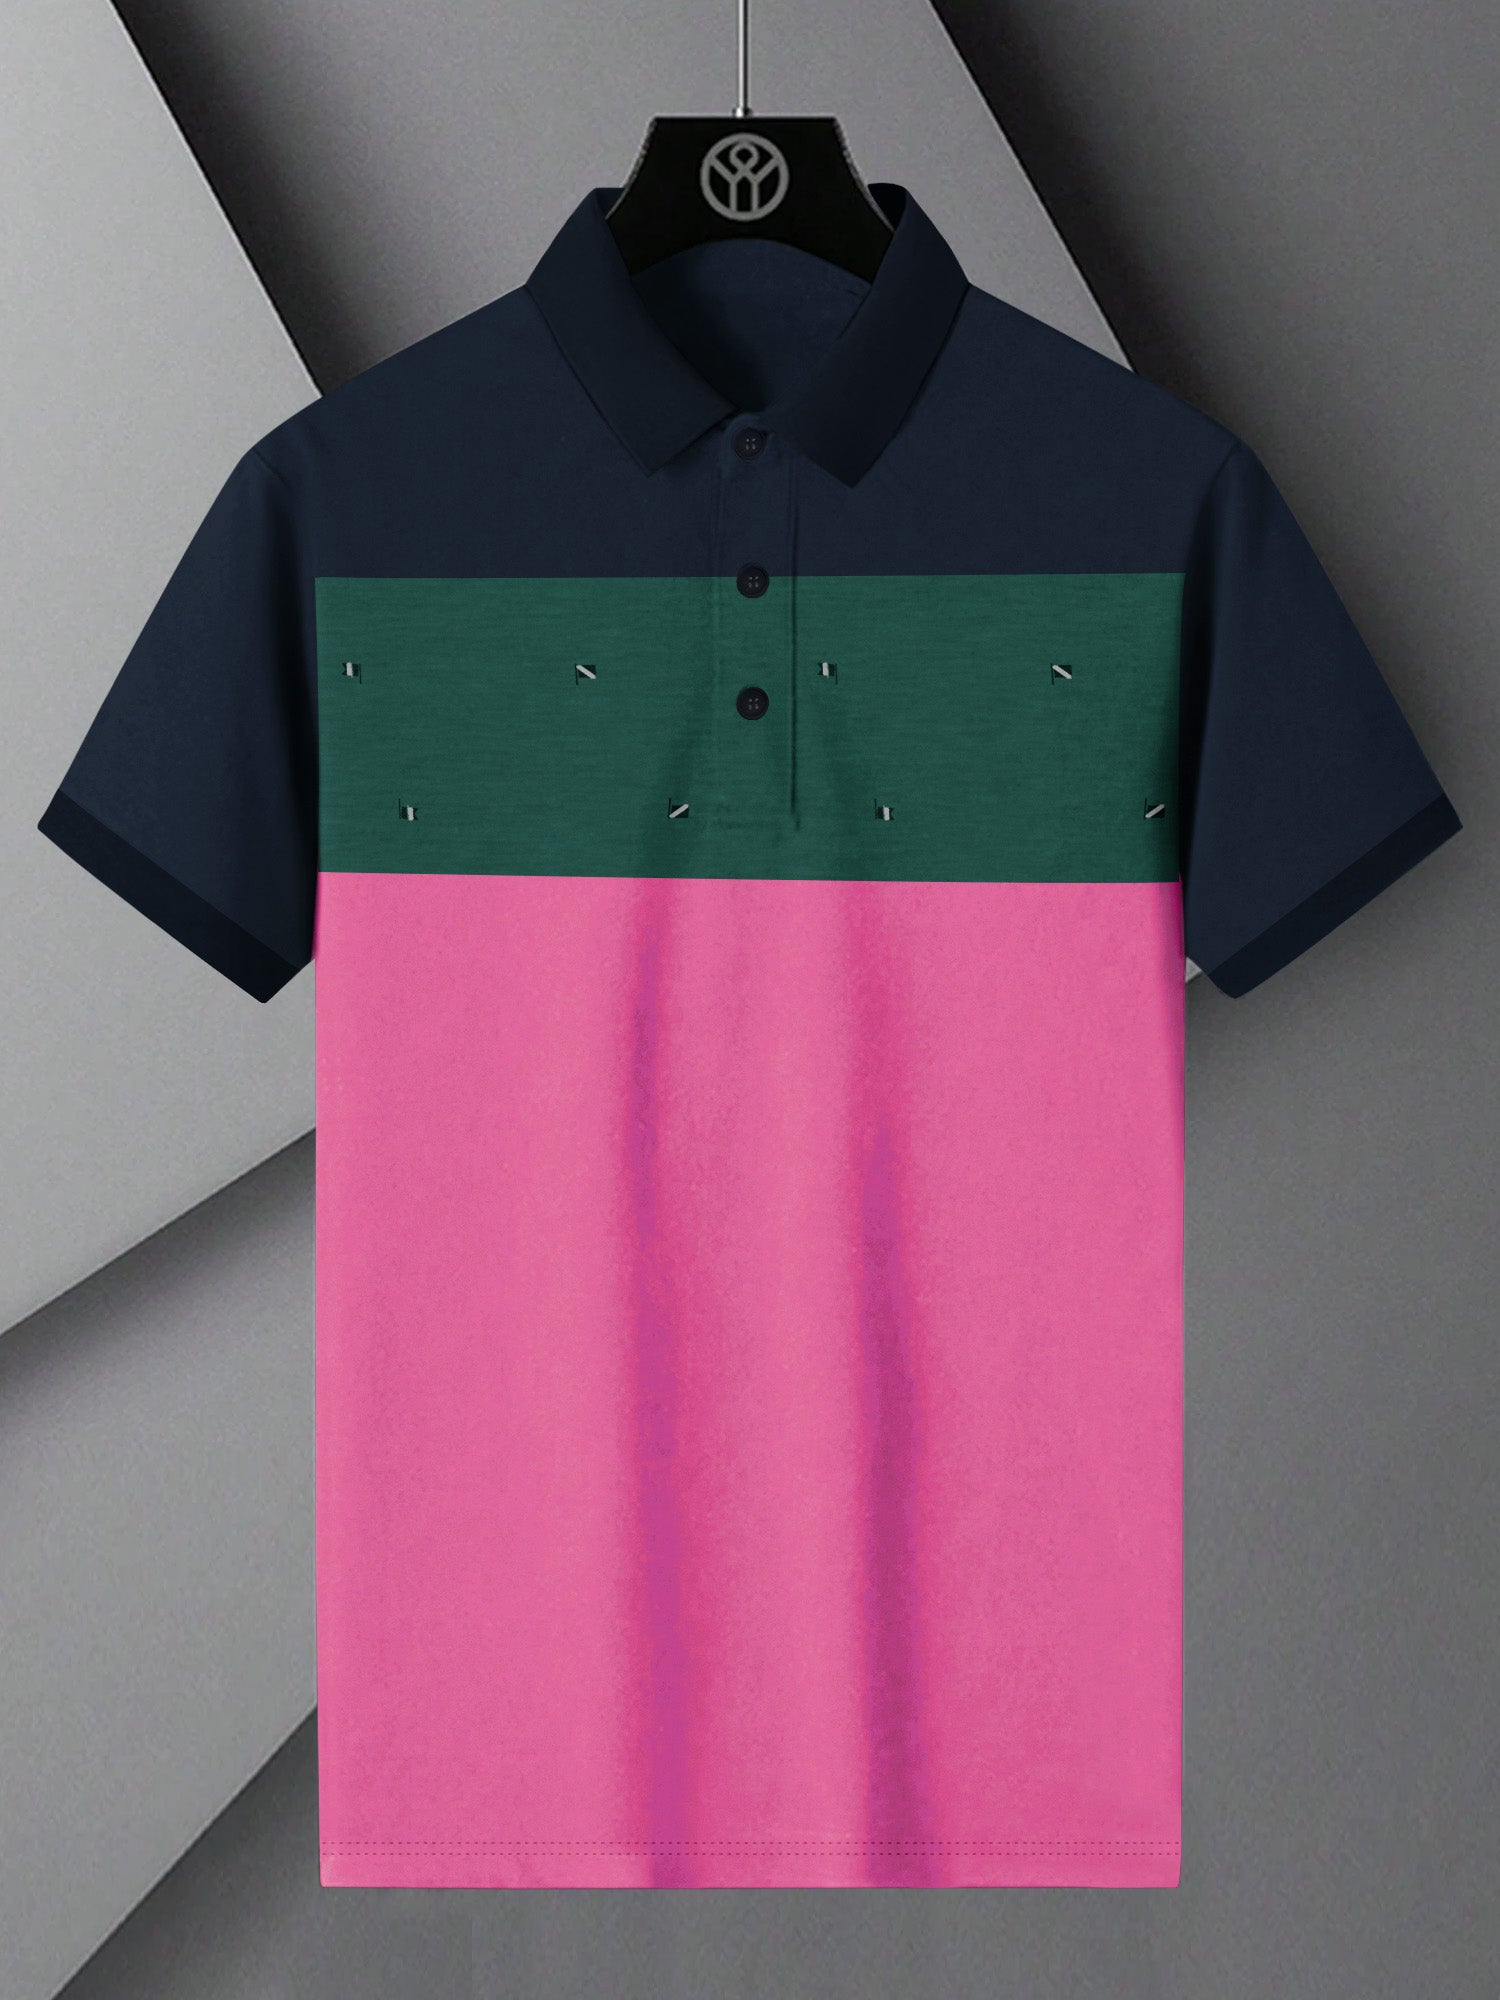 NXT Summer Polo Shirt For Men-Pink with Navy & Green-BE685/BR12938